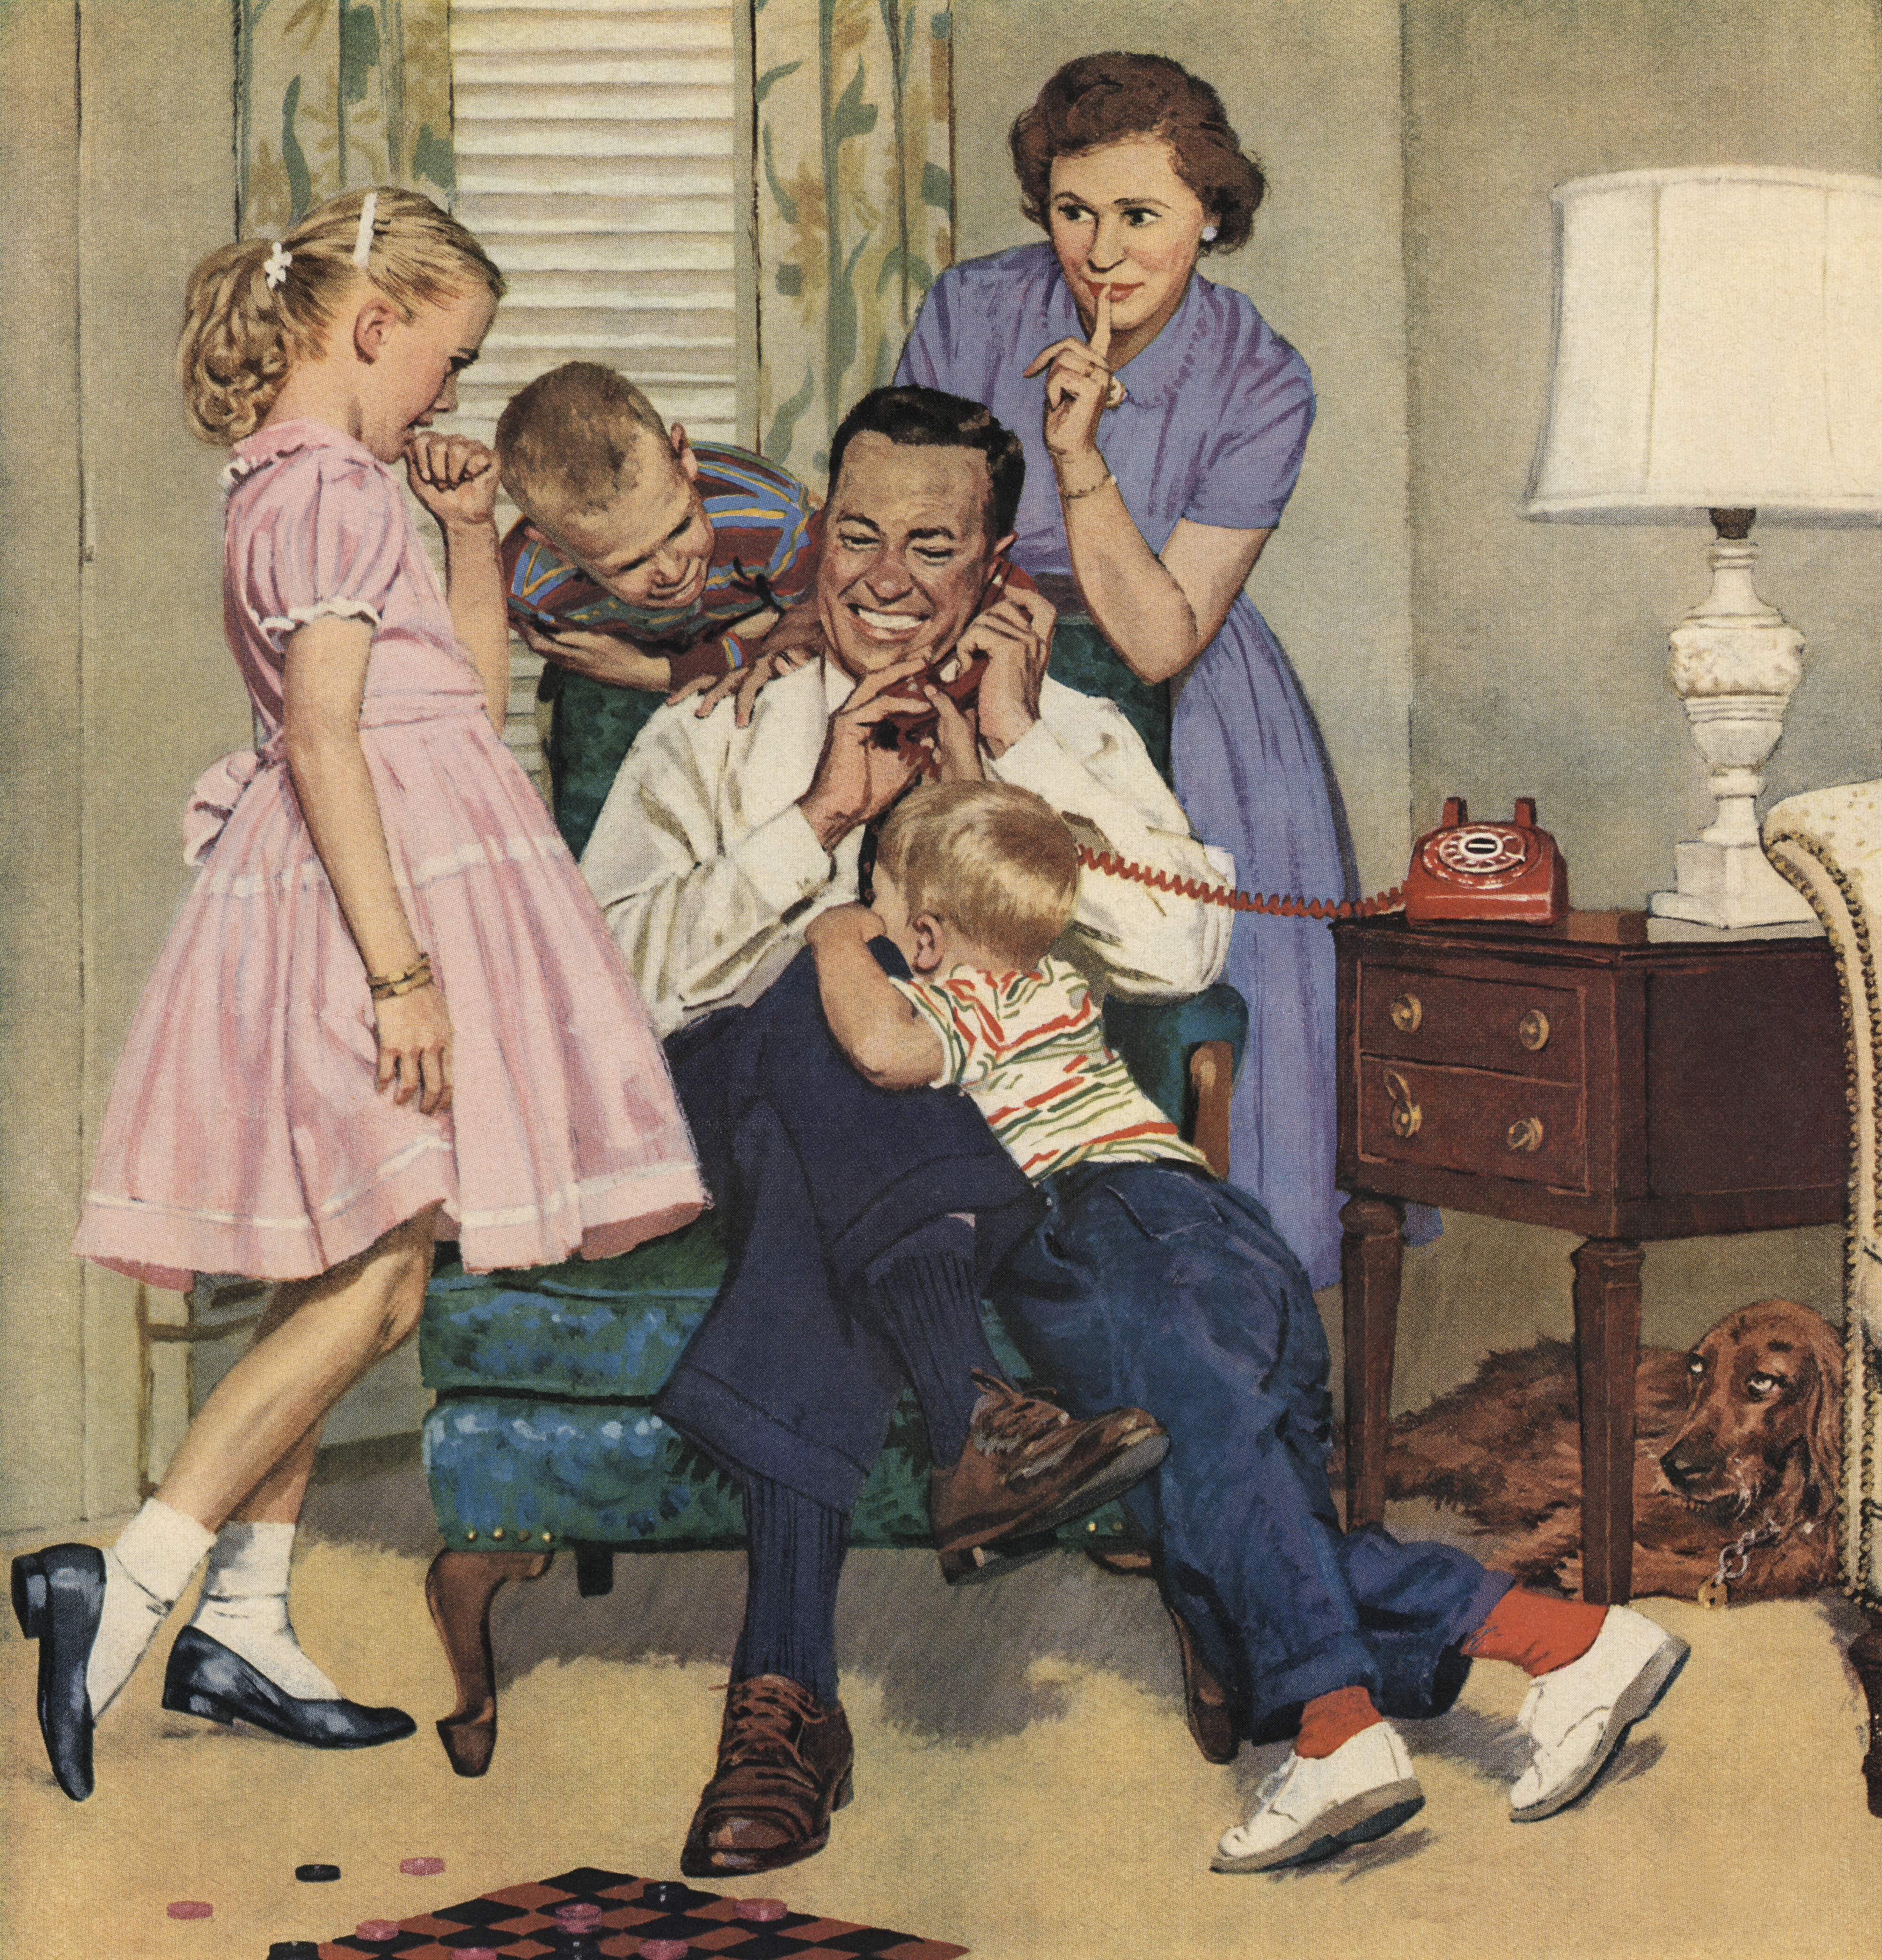 Father sits in a chair talking on the phone while his wife and three children playfully interact with him. A dog lies on the floor near a lamp and side table